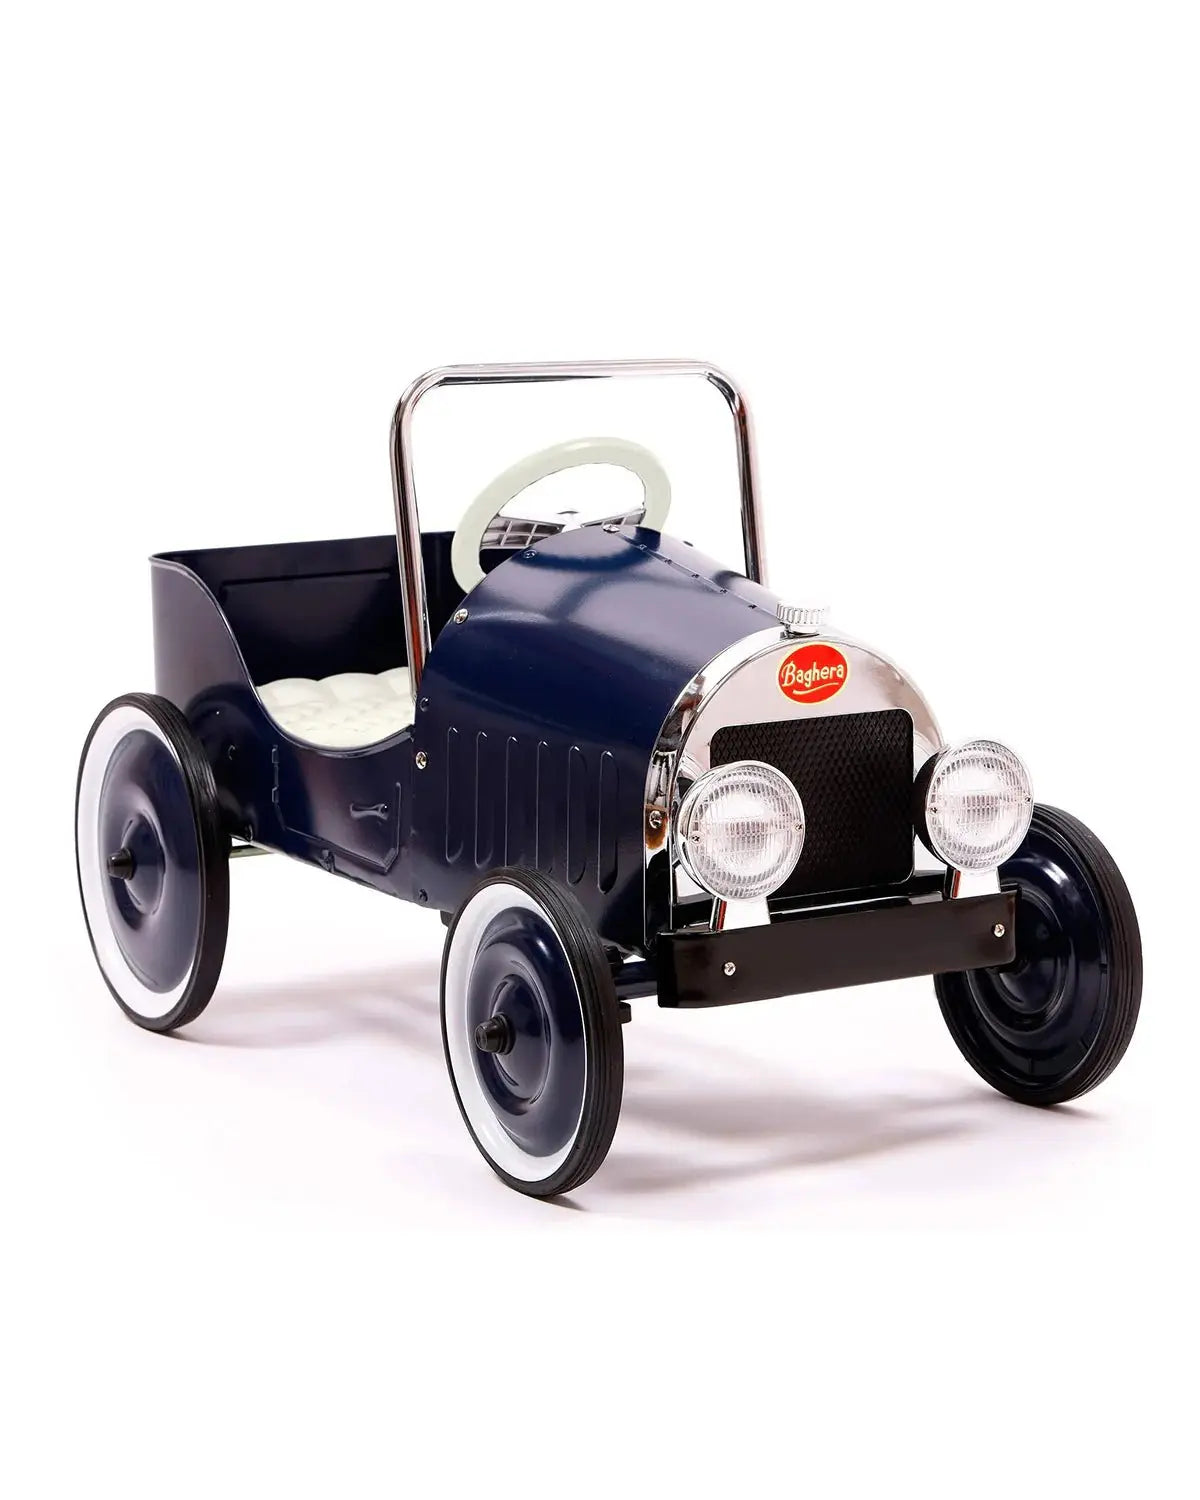 Classic Pedal Car, Ride-On Car with Adjustable Pedals, Durable Toy Car, Kids Ride-On Vehicle  Baghera Blue  